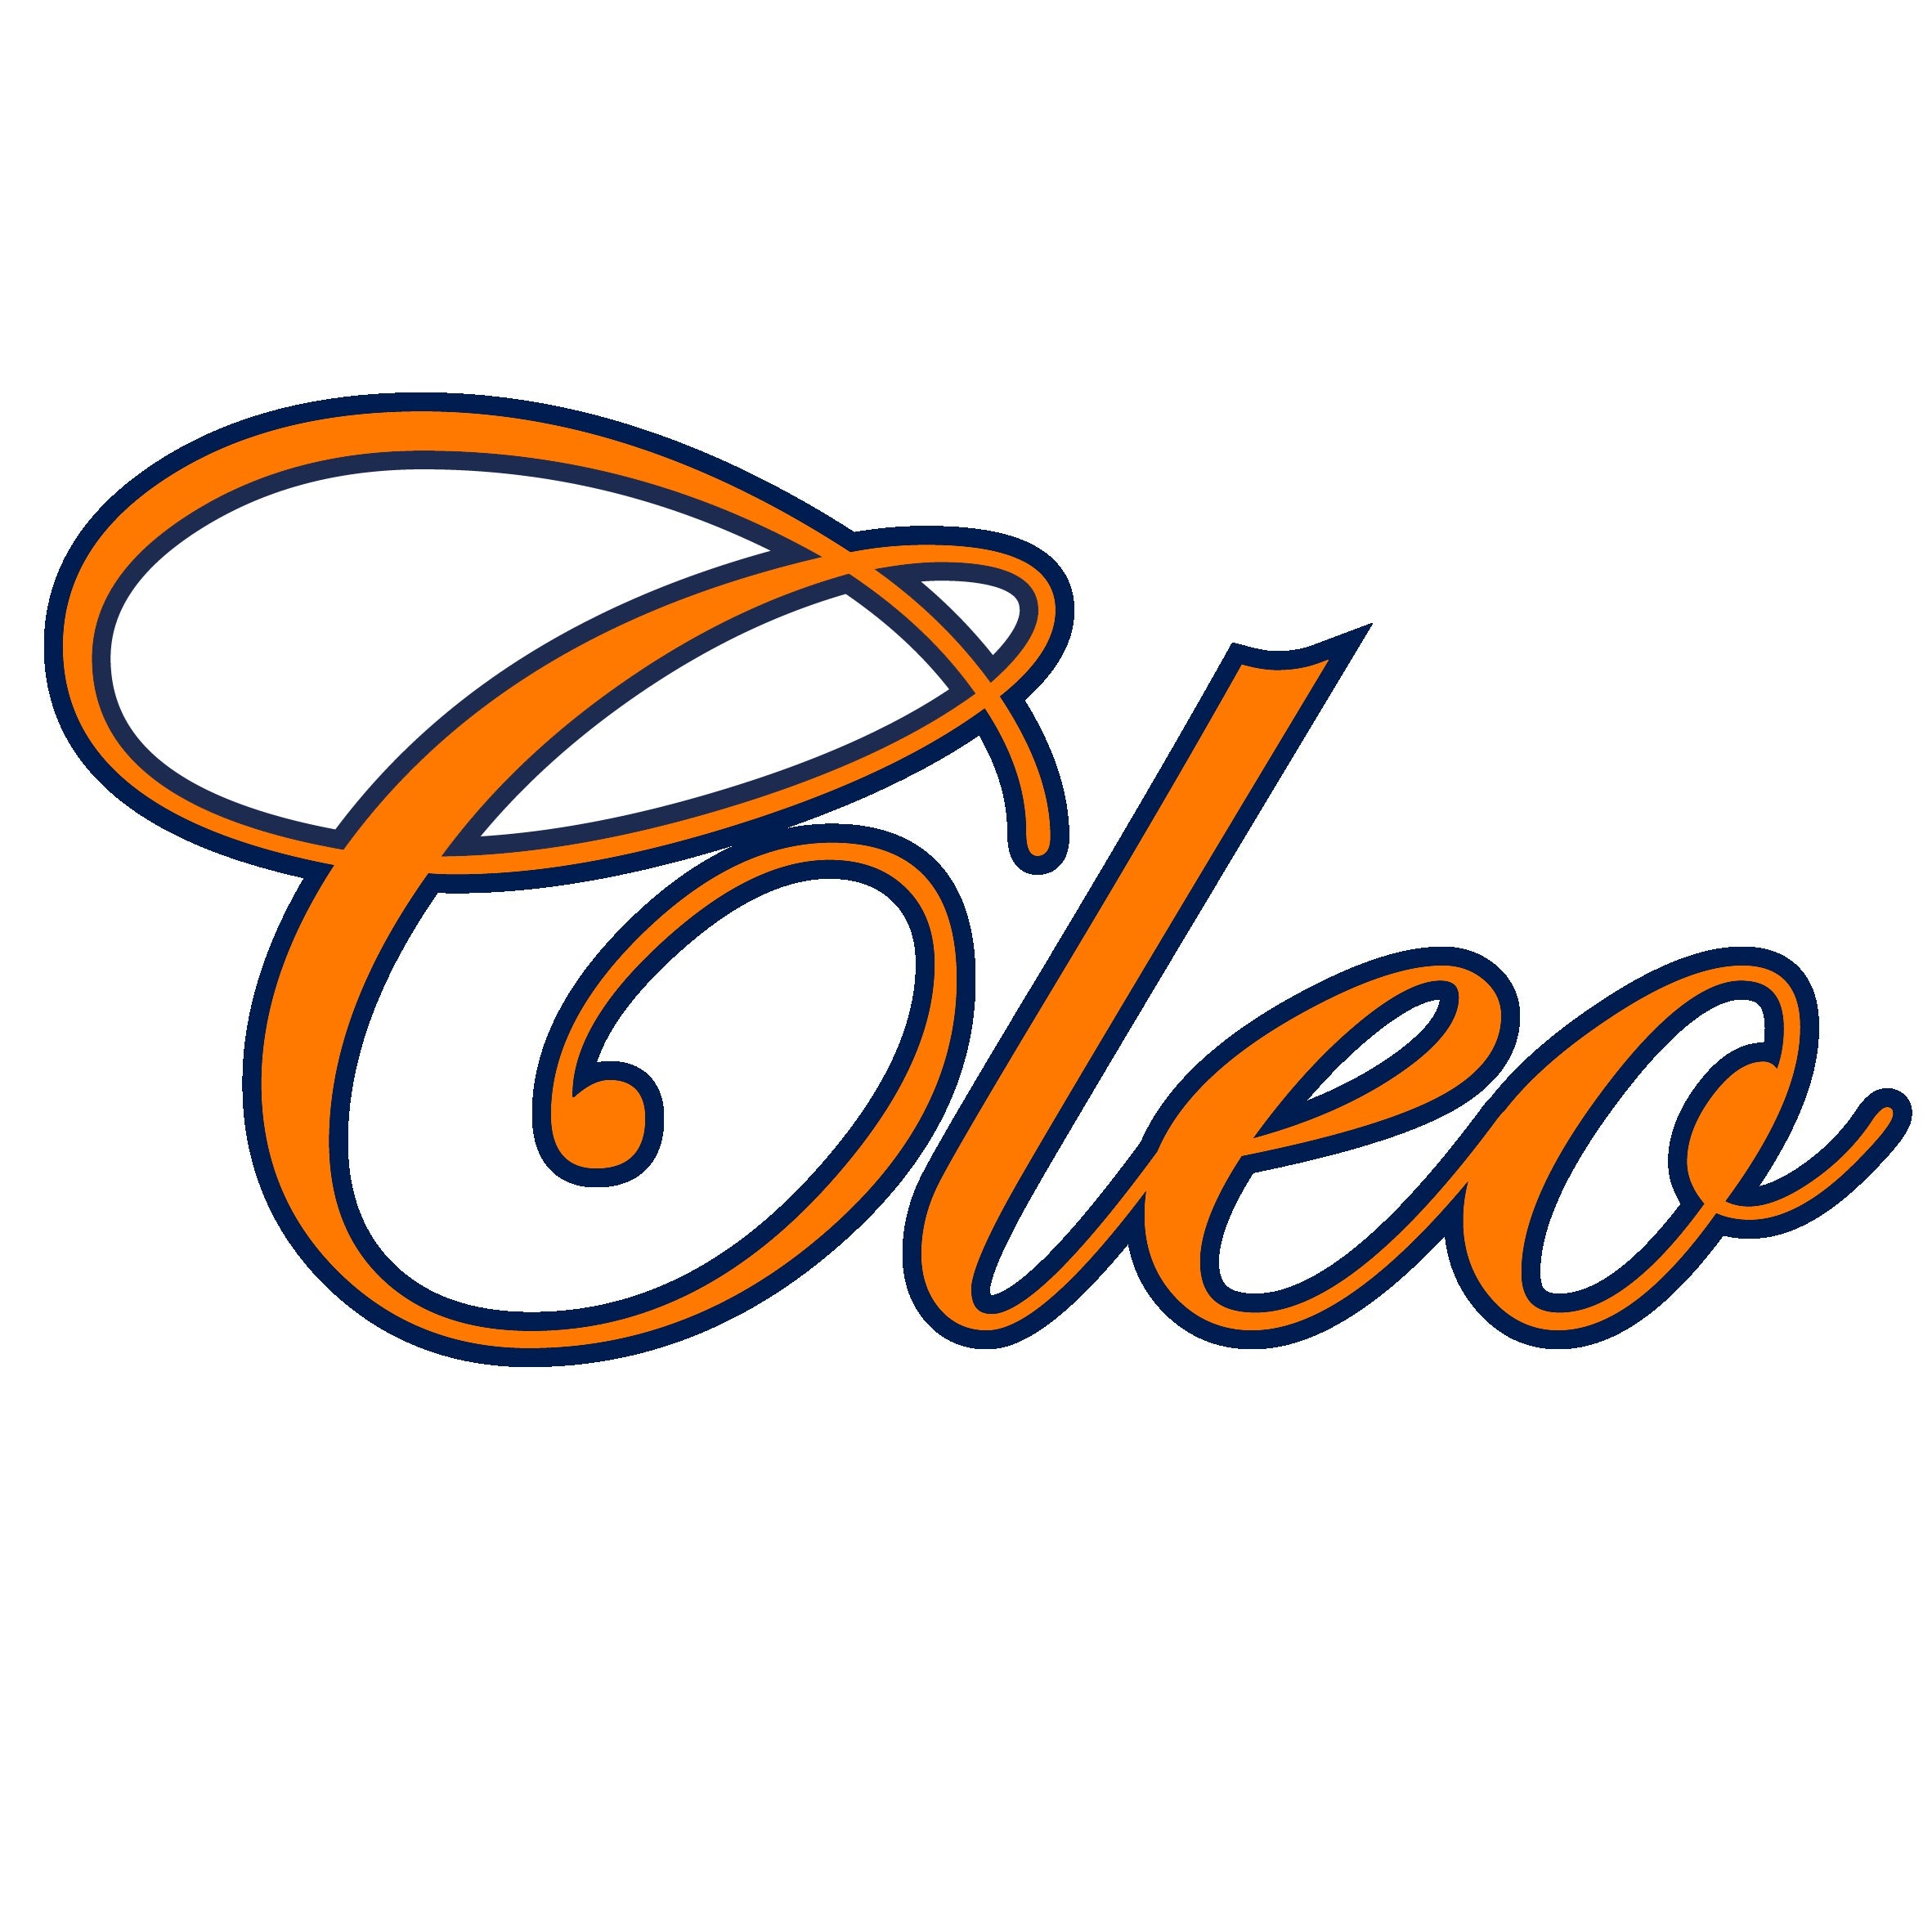 CLEO - MADE IN ITALY